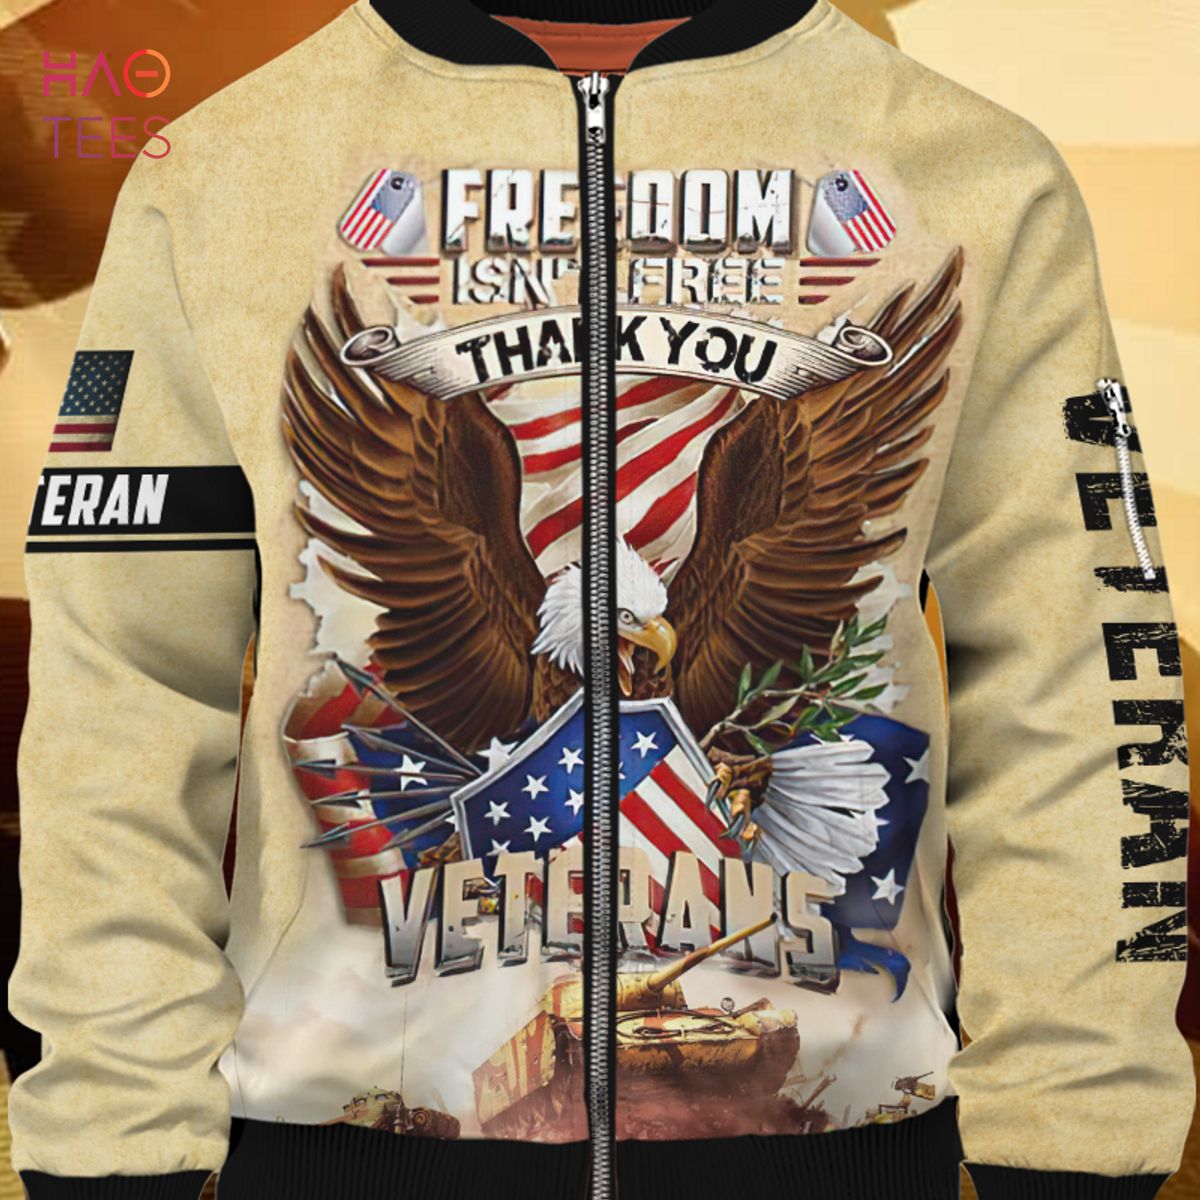 NEW Freedom Isn't Free Thank You Veterans 3D Bomber